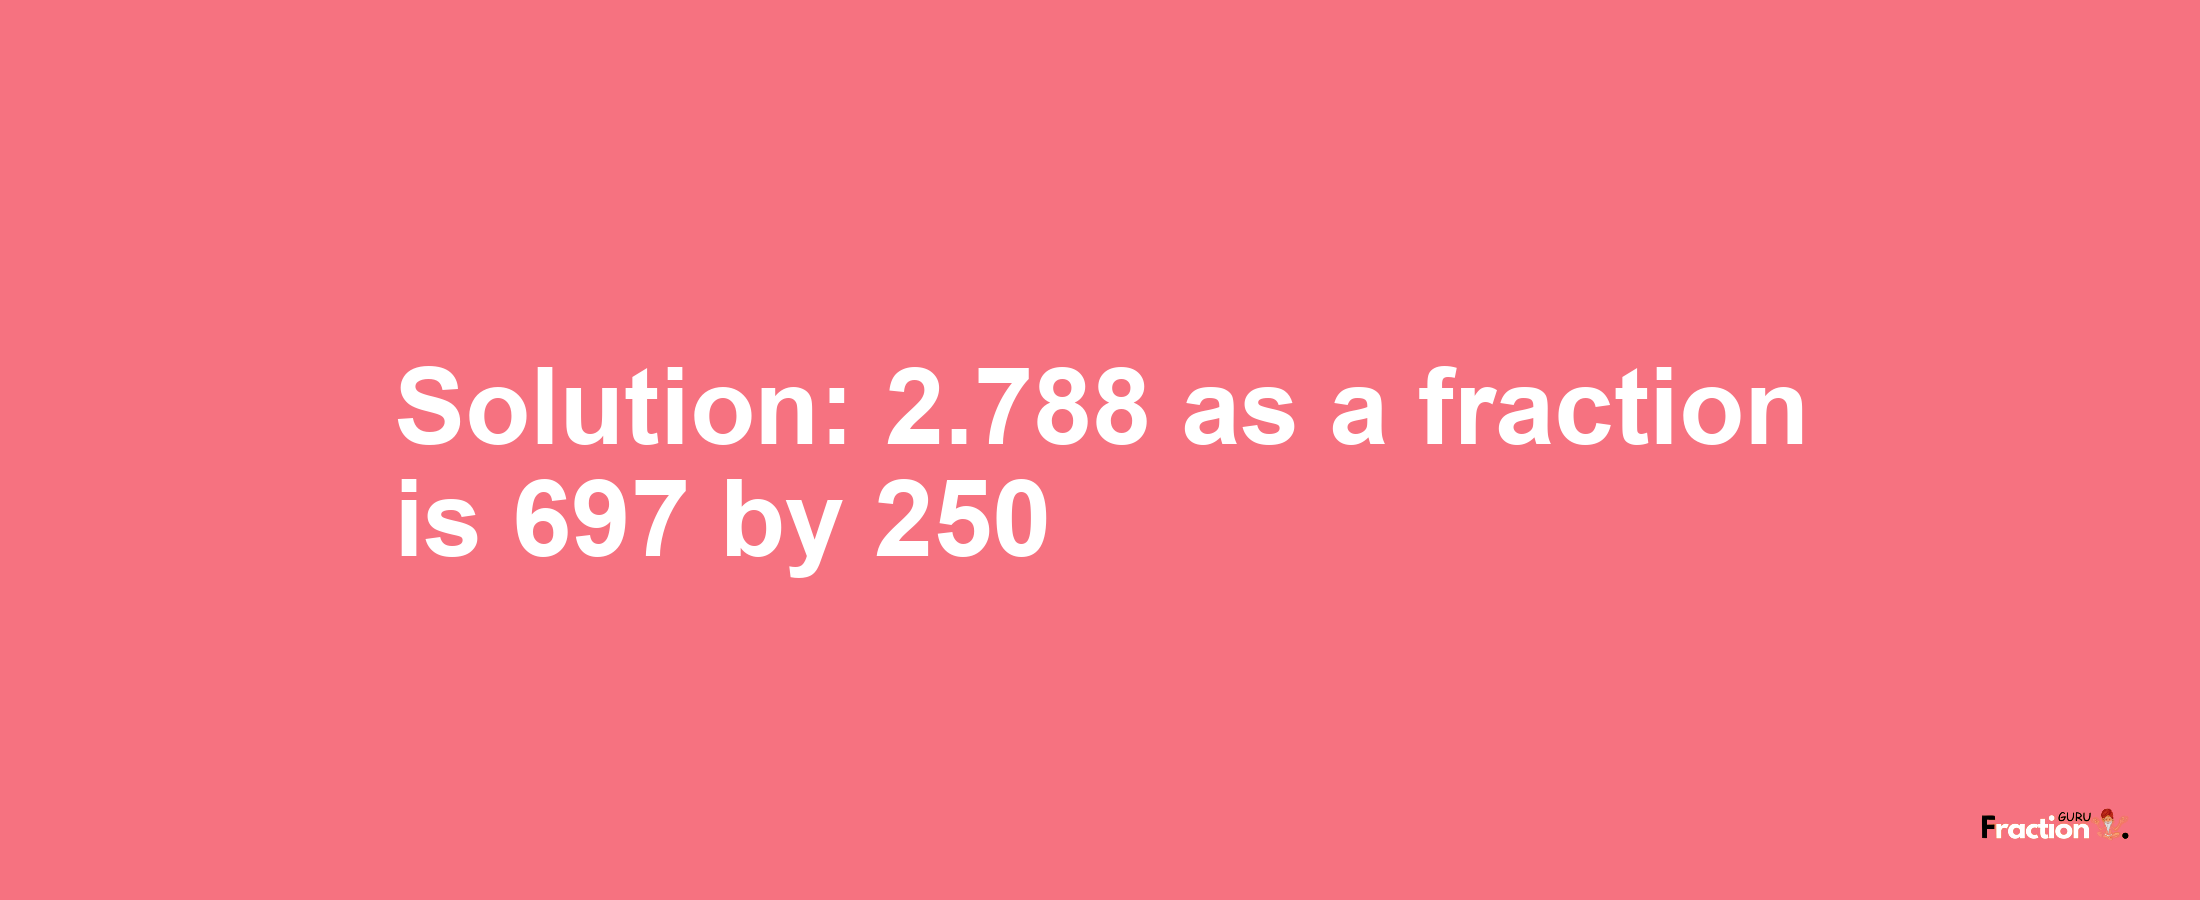 Solution:2.788 as a fraction is 697/250